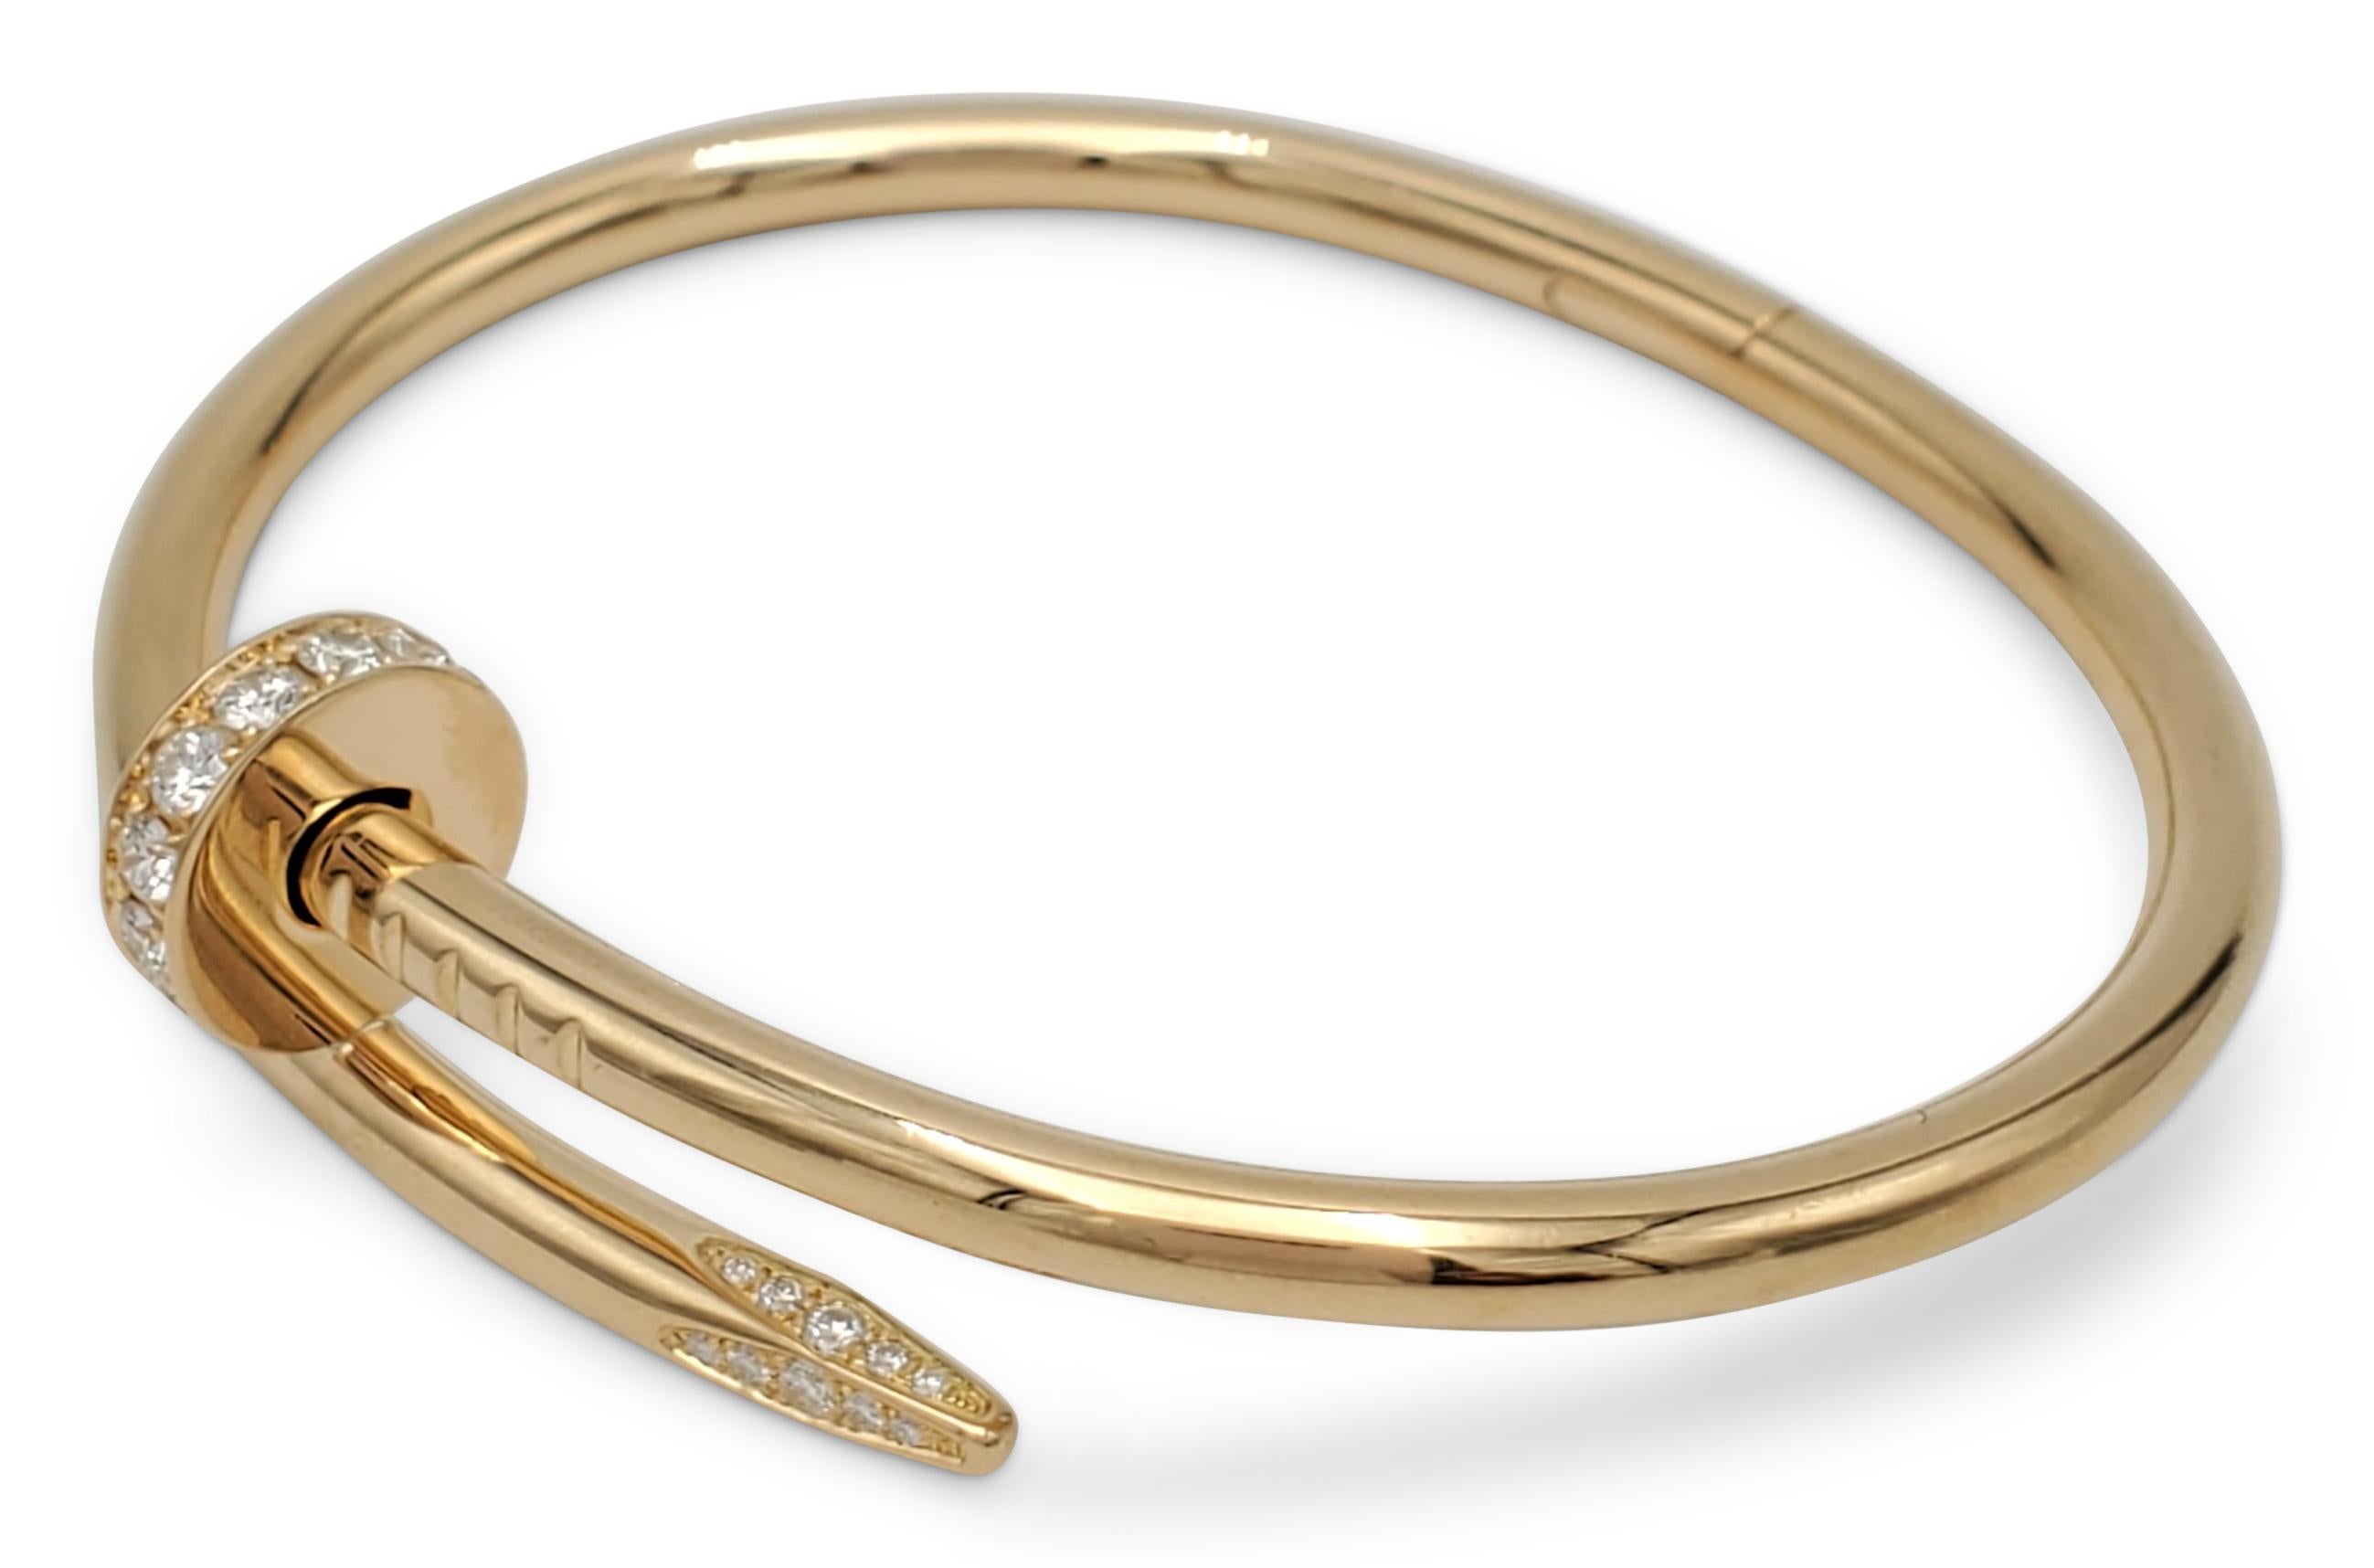 Designed as a 'just a nail', this authentic Cartier 'Juste un Clou' ring is modern, transcending the everyday, yet bold. The nail bracelet is an innovative twist on a familiar and ordinary object. The bracelet is enhanced with high quality round